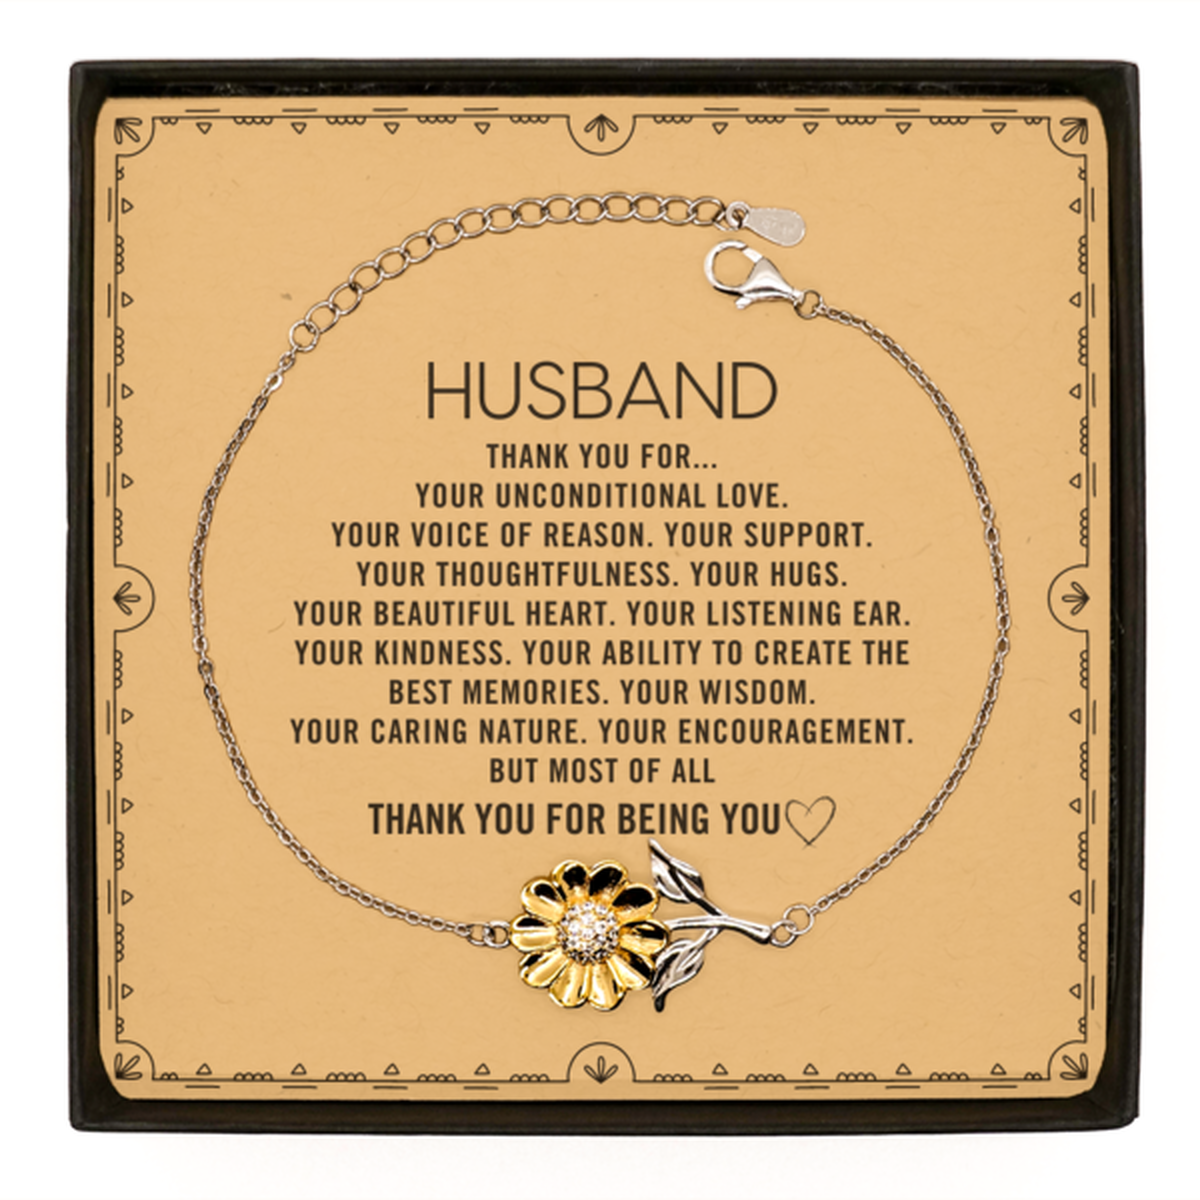 Husband Sunflower Bracelet Custom, Message Card Gifts For Husband Christmas Graduation Birthday Gifts for Men Women Husband Thank you for Your unconditional love